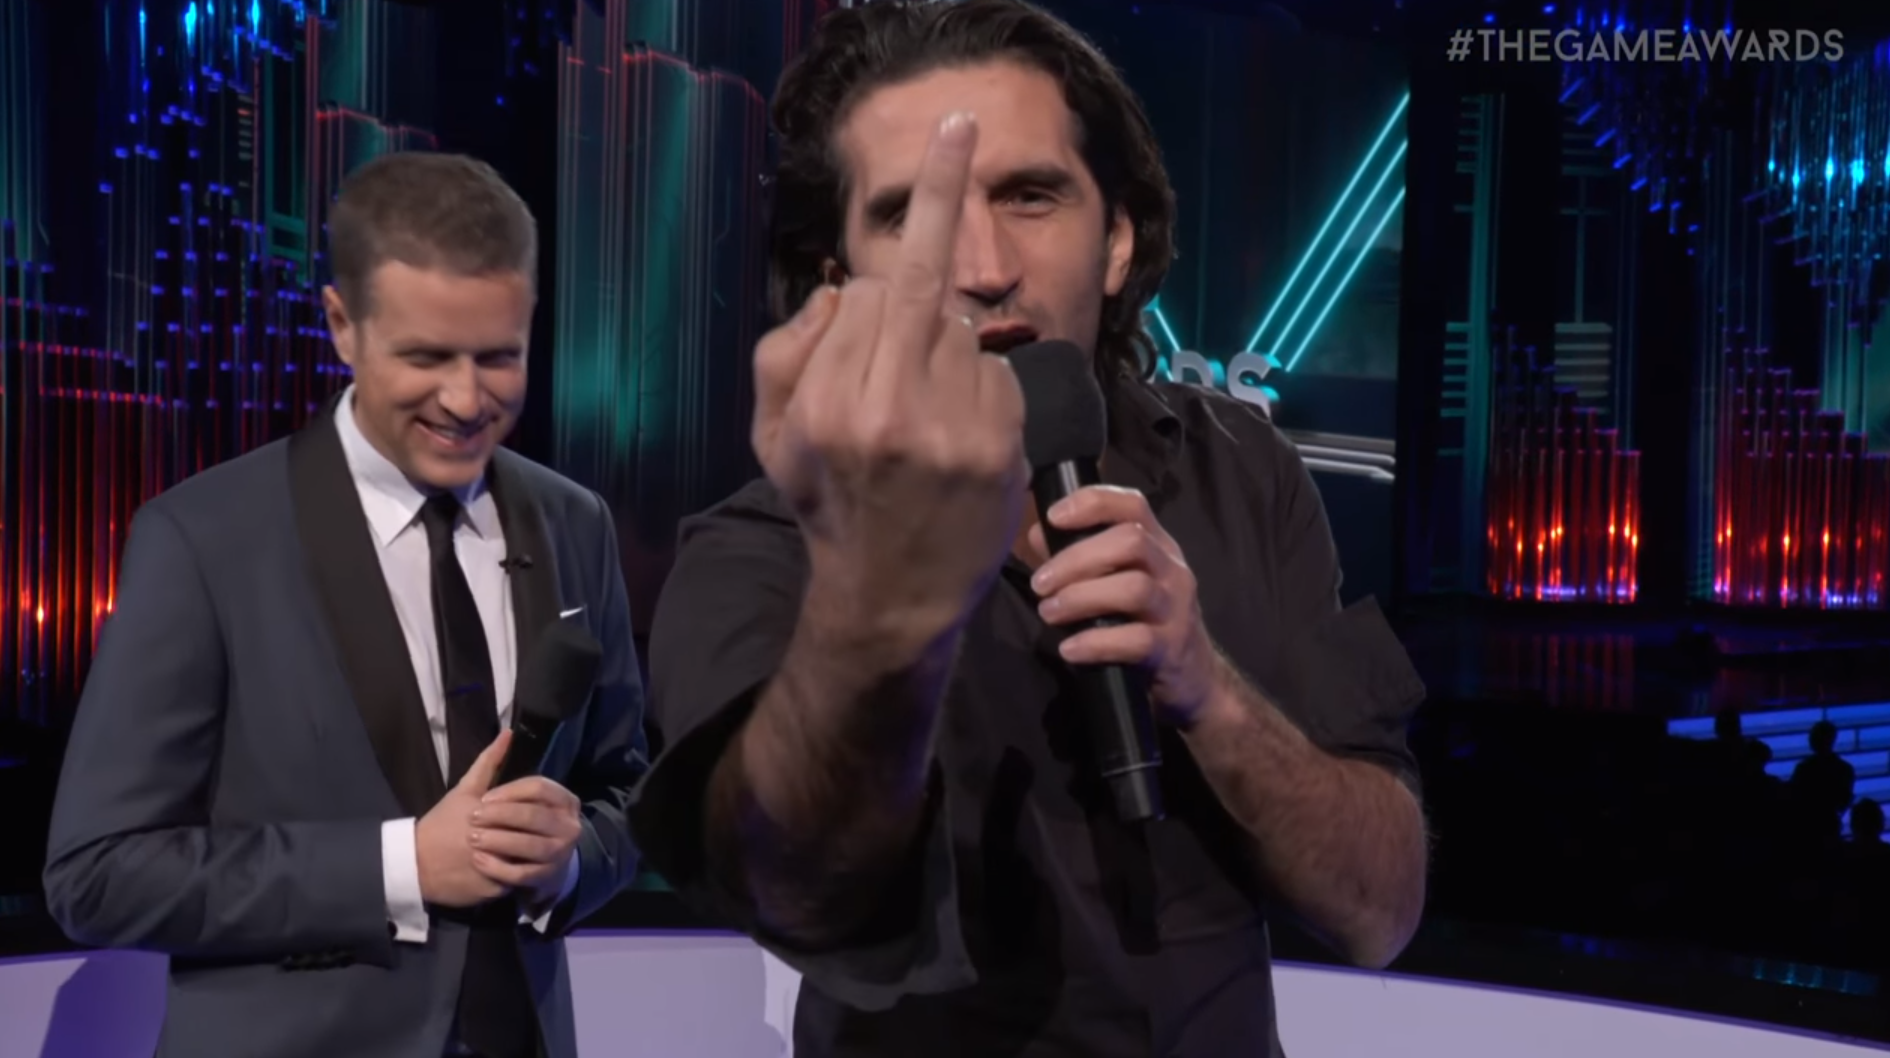 Image for "I know some people thought I was on cocaine, but no" - Josef Fares explains his 'fuck the Oscars' speech